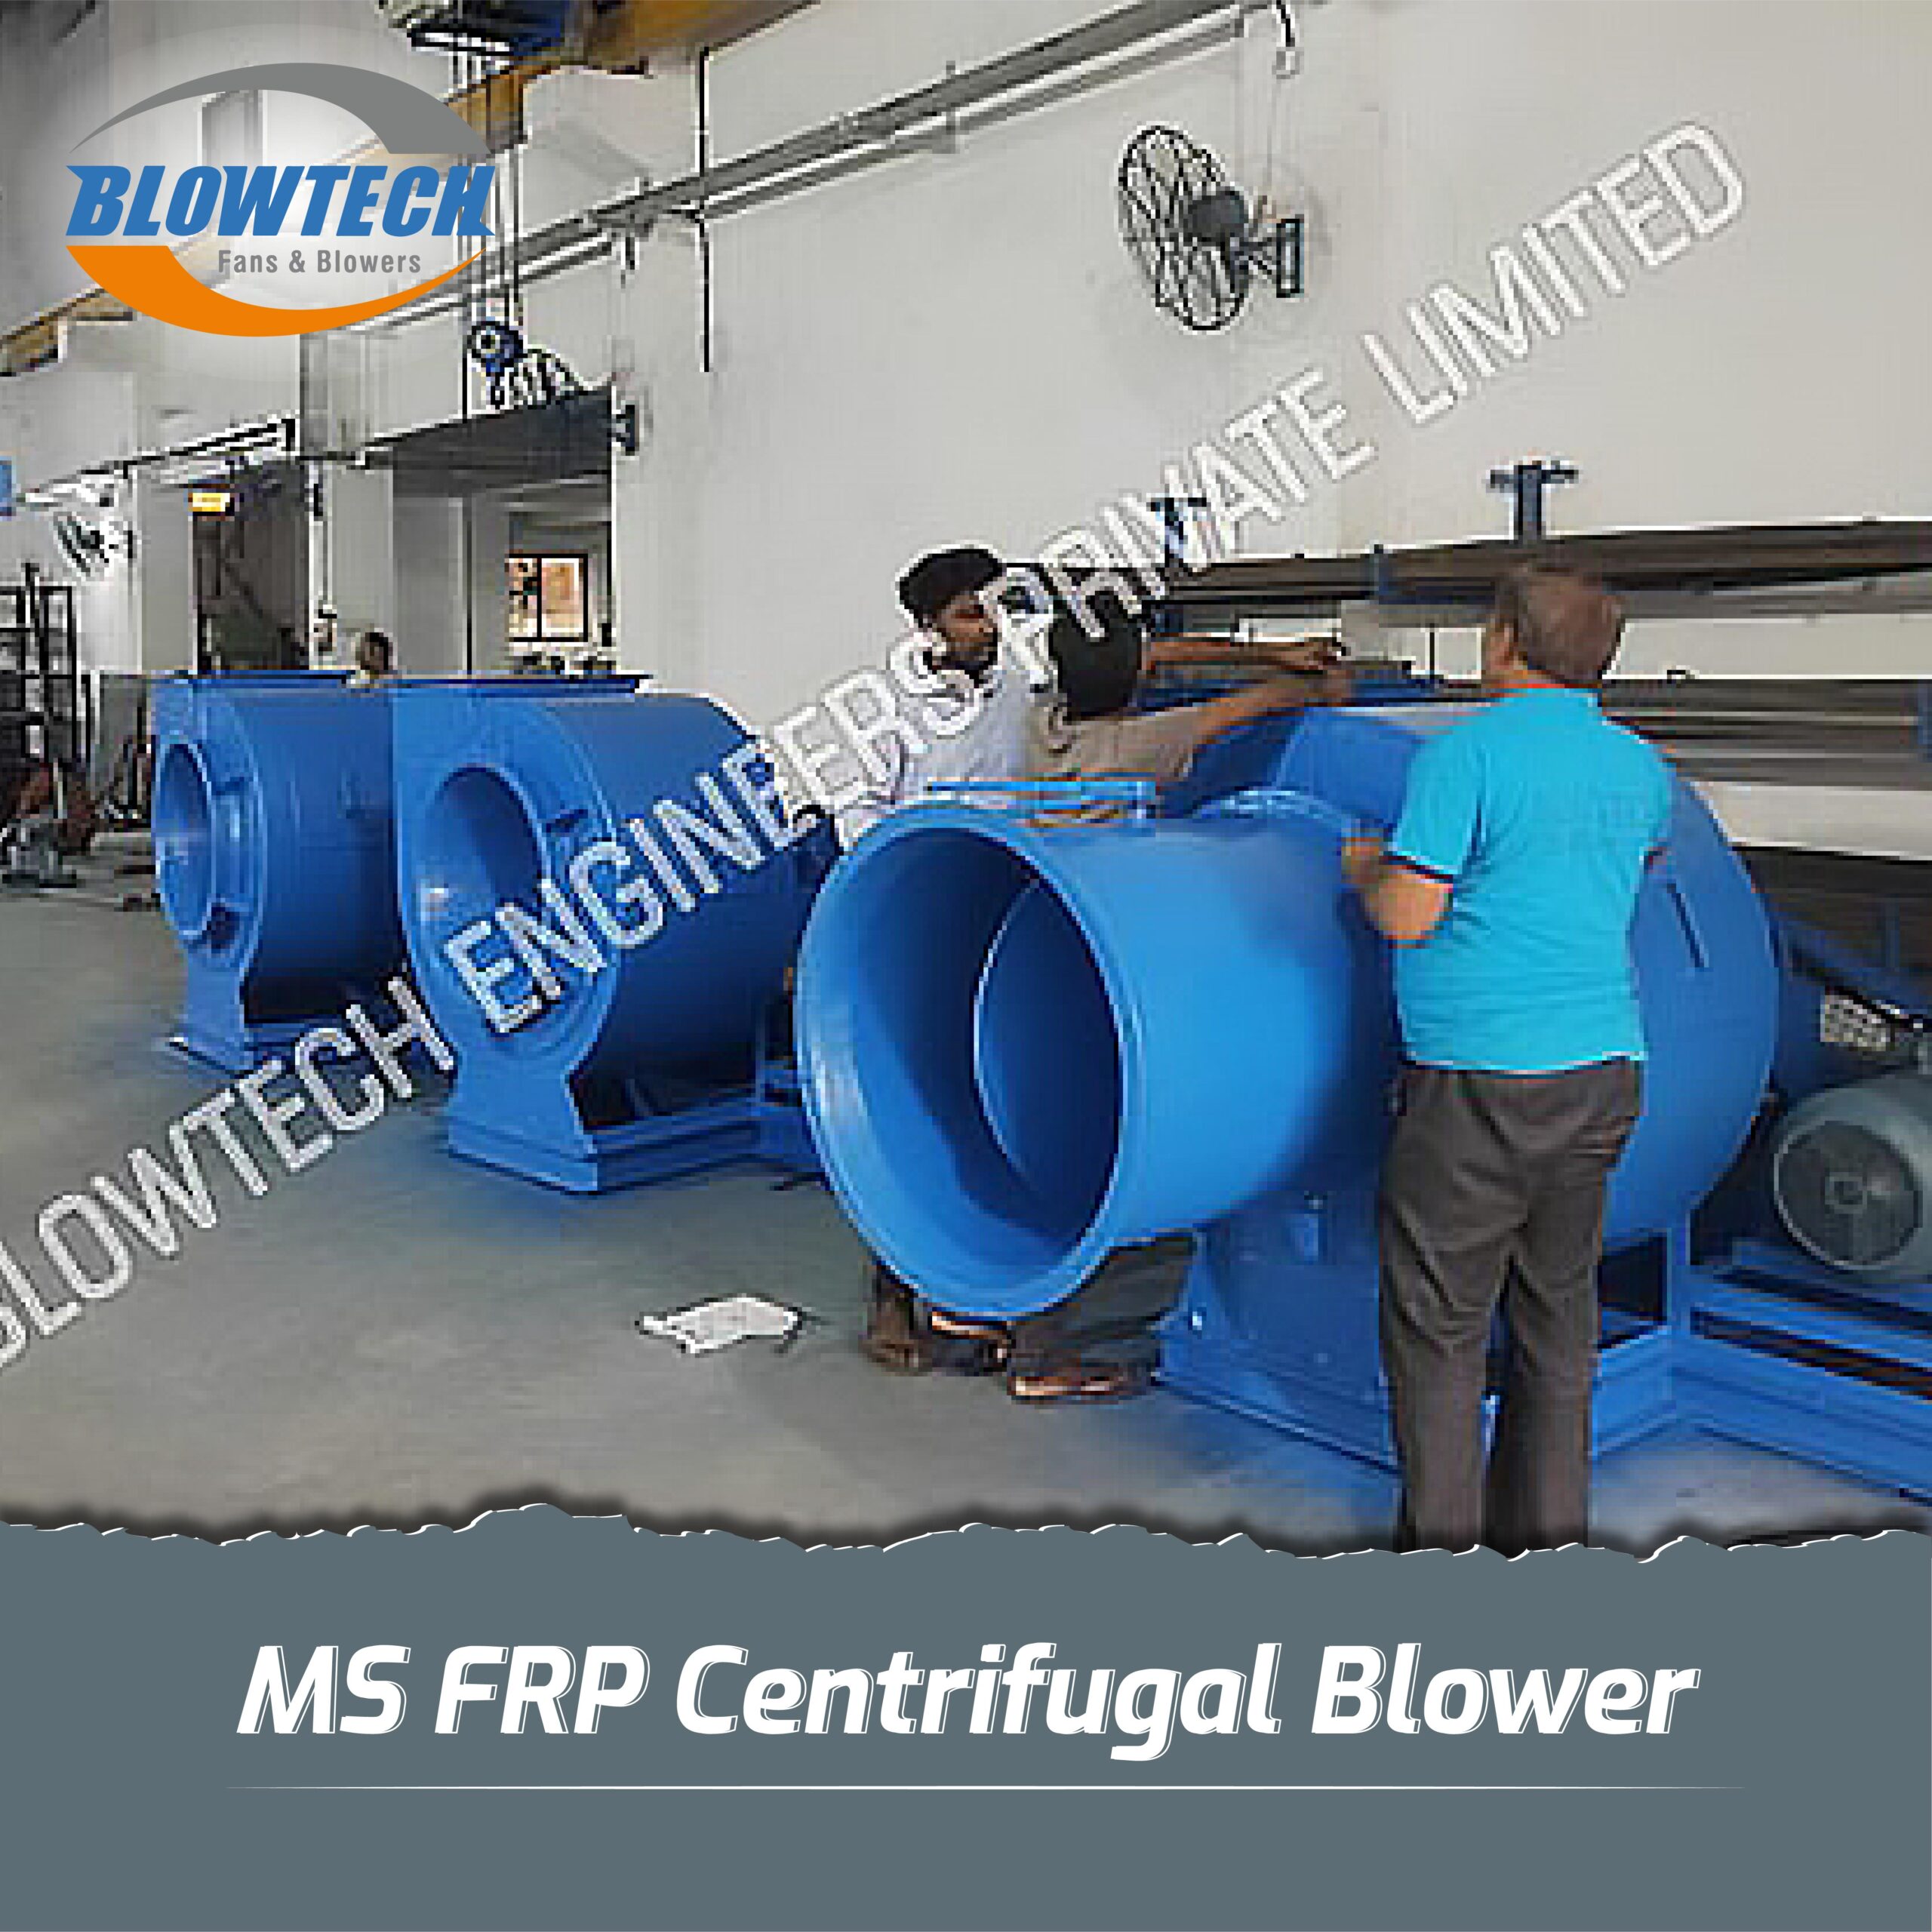 MS+FRP Centrifugal Blower  manufacturer, supplier and exporter in Mumbai, India